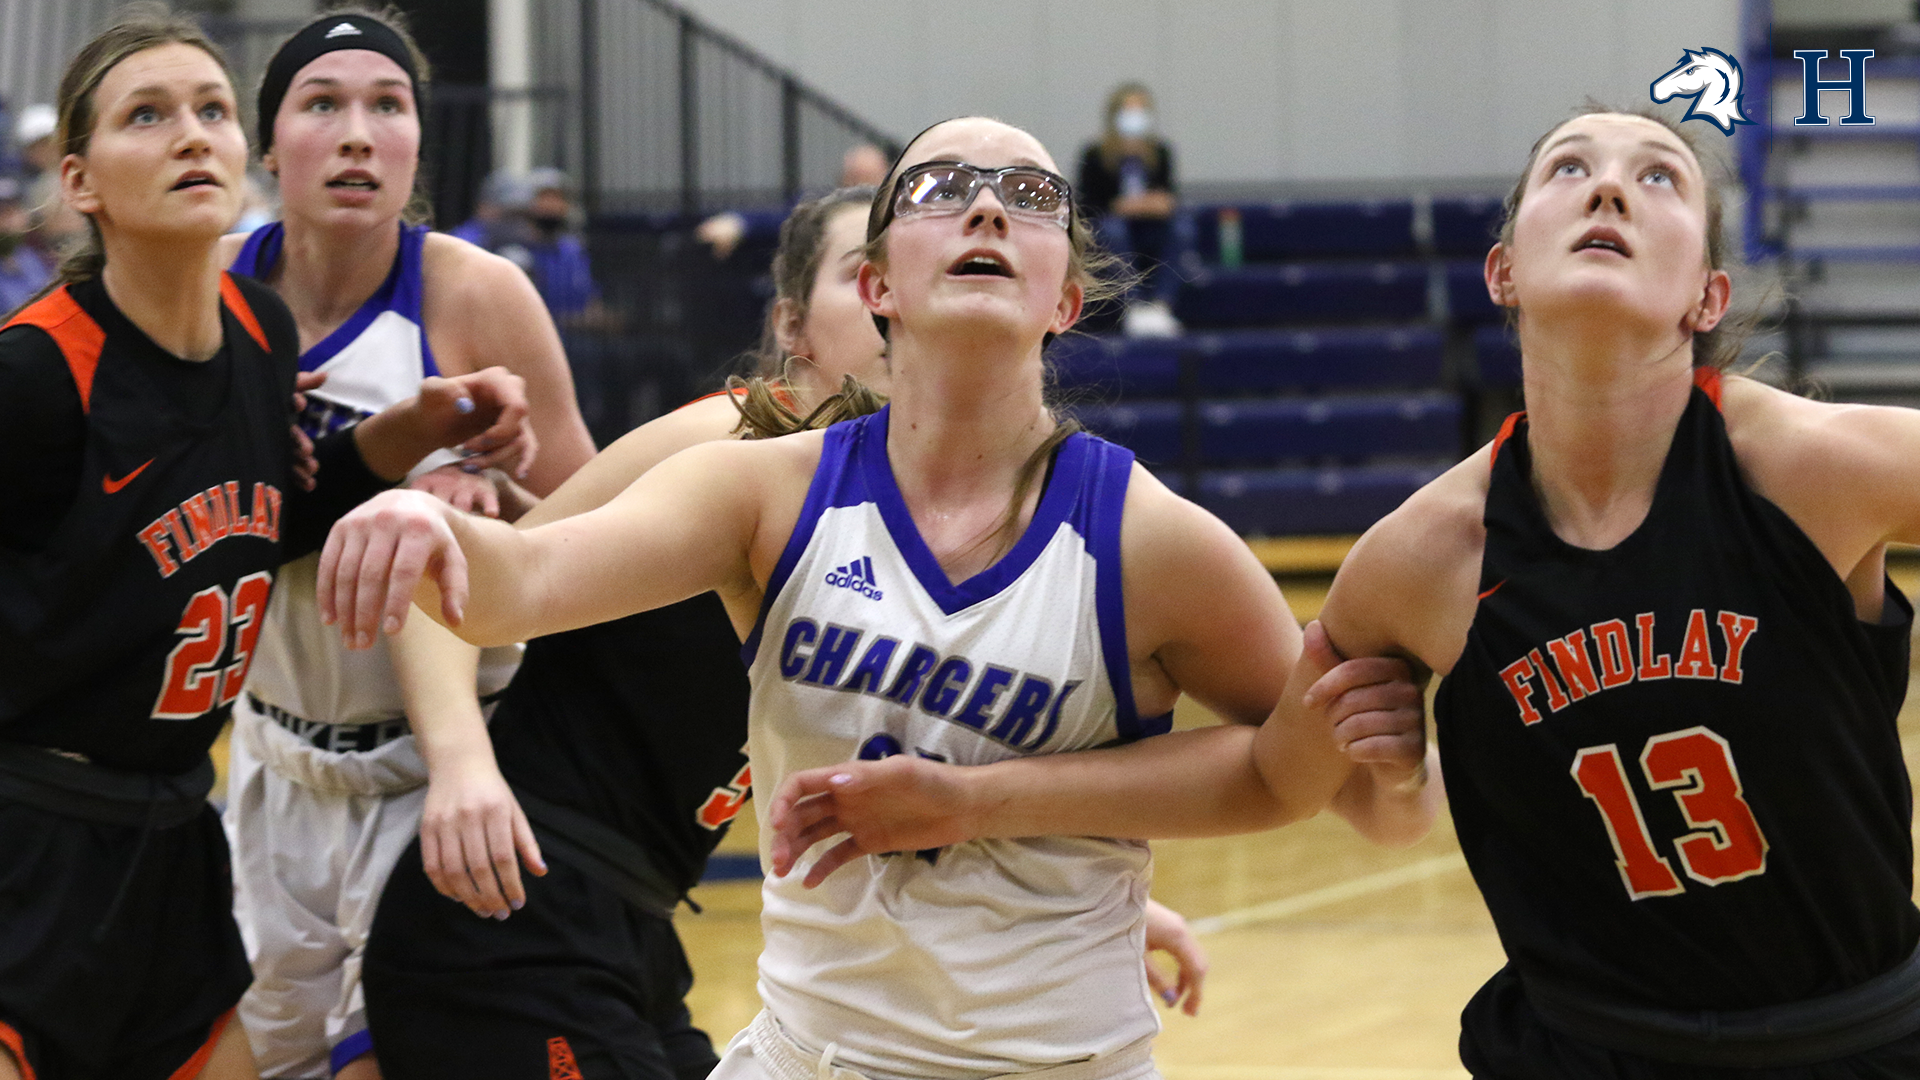 Charger women fall in final seconds to visiting Findlay, 72-68